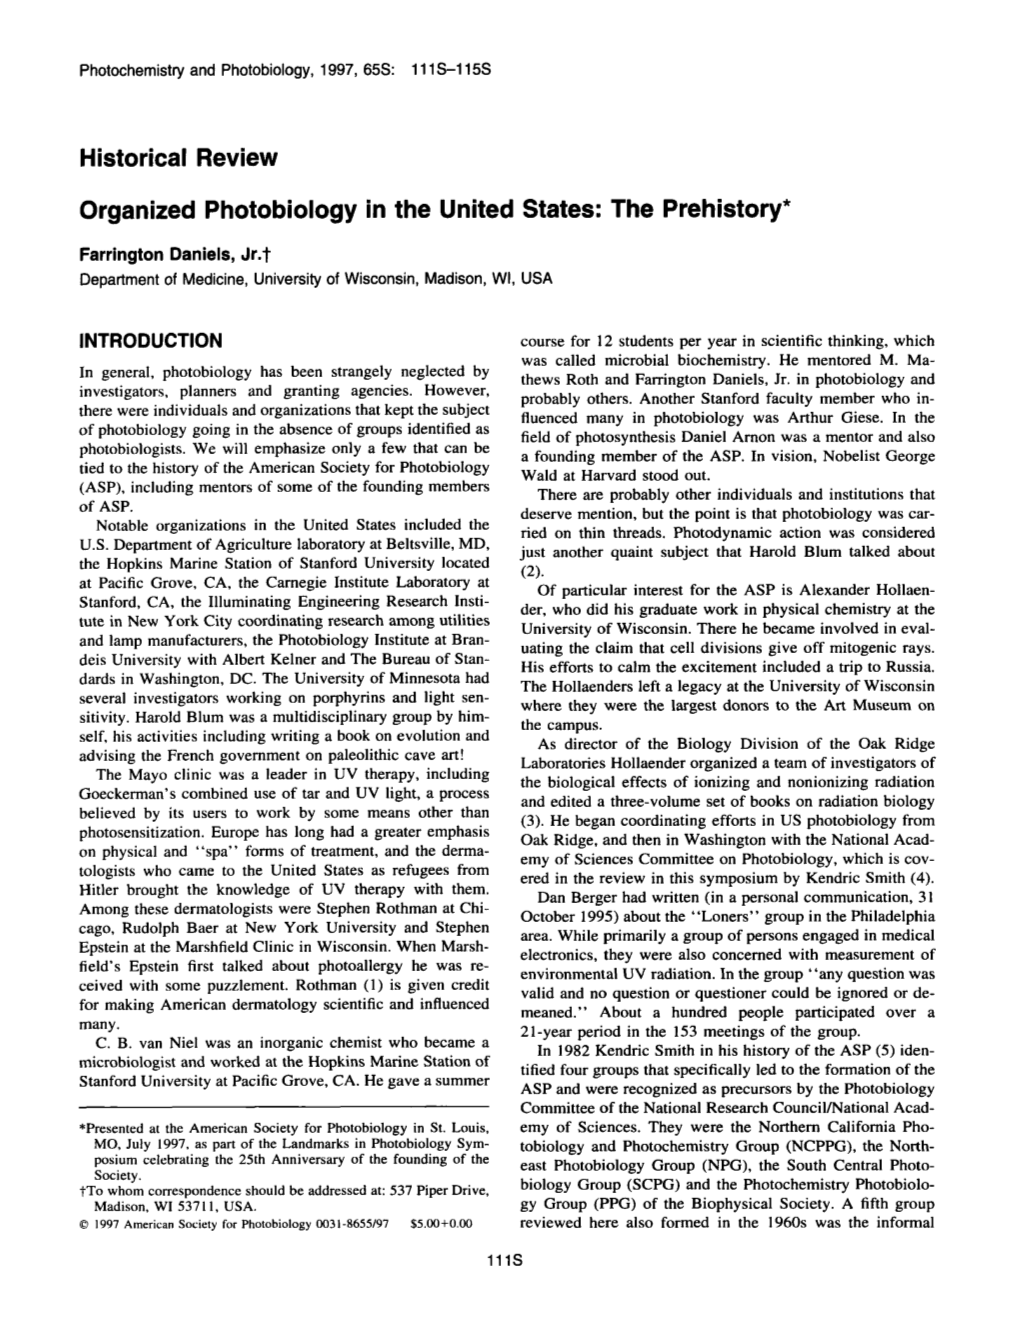 Organized Photobiology in the United States: the Prehistory*